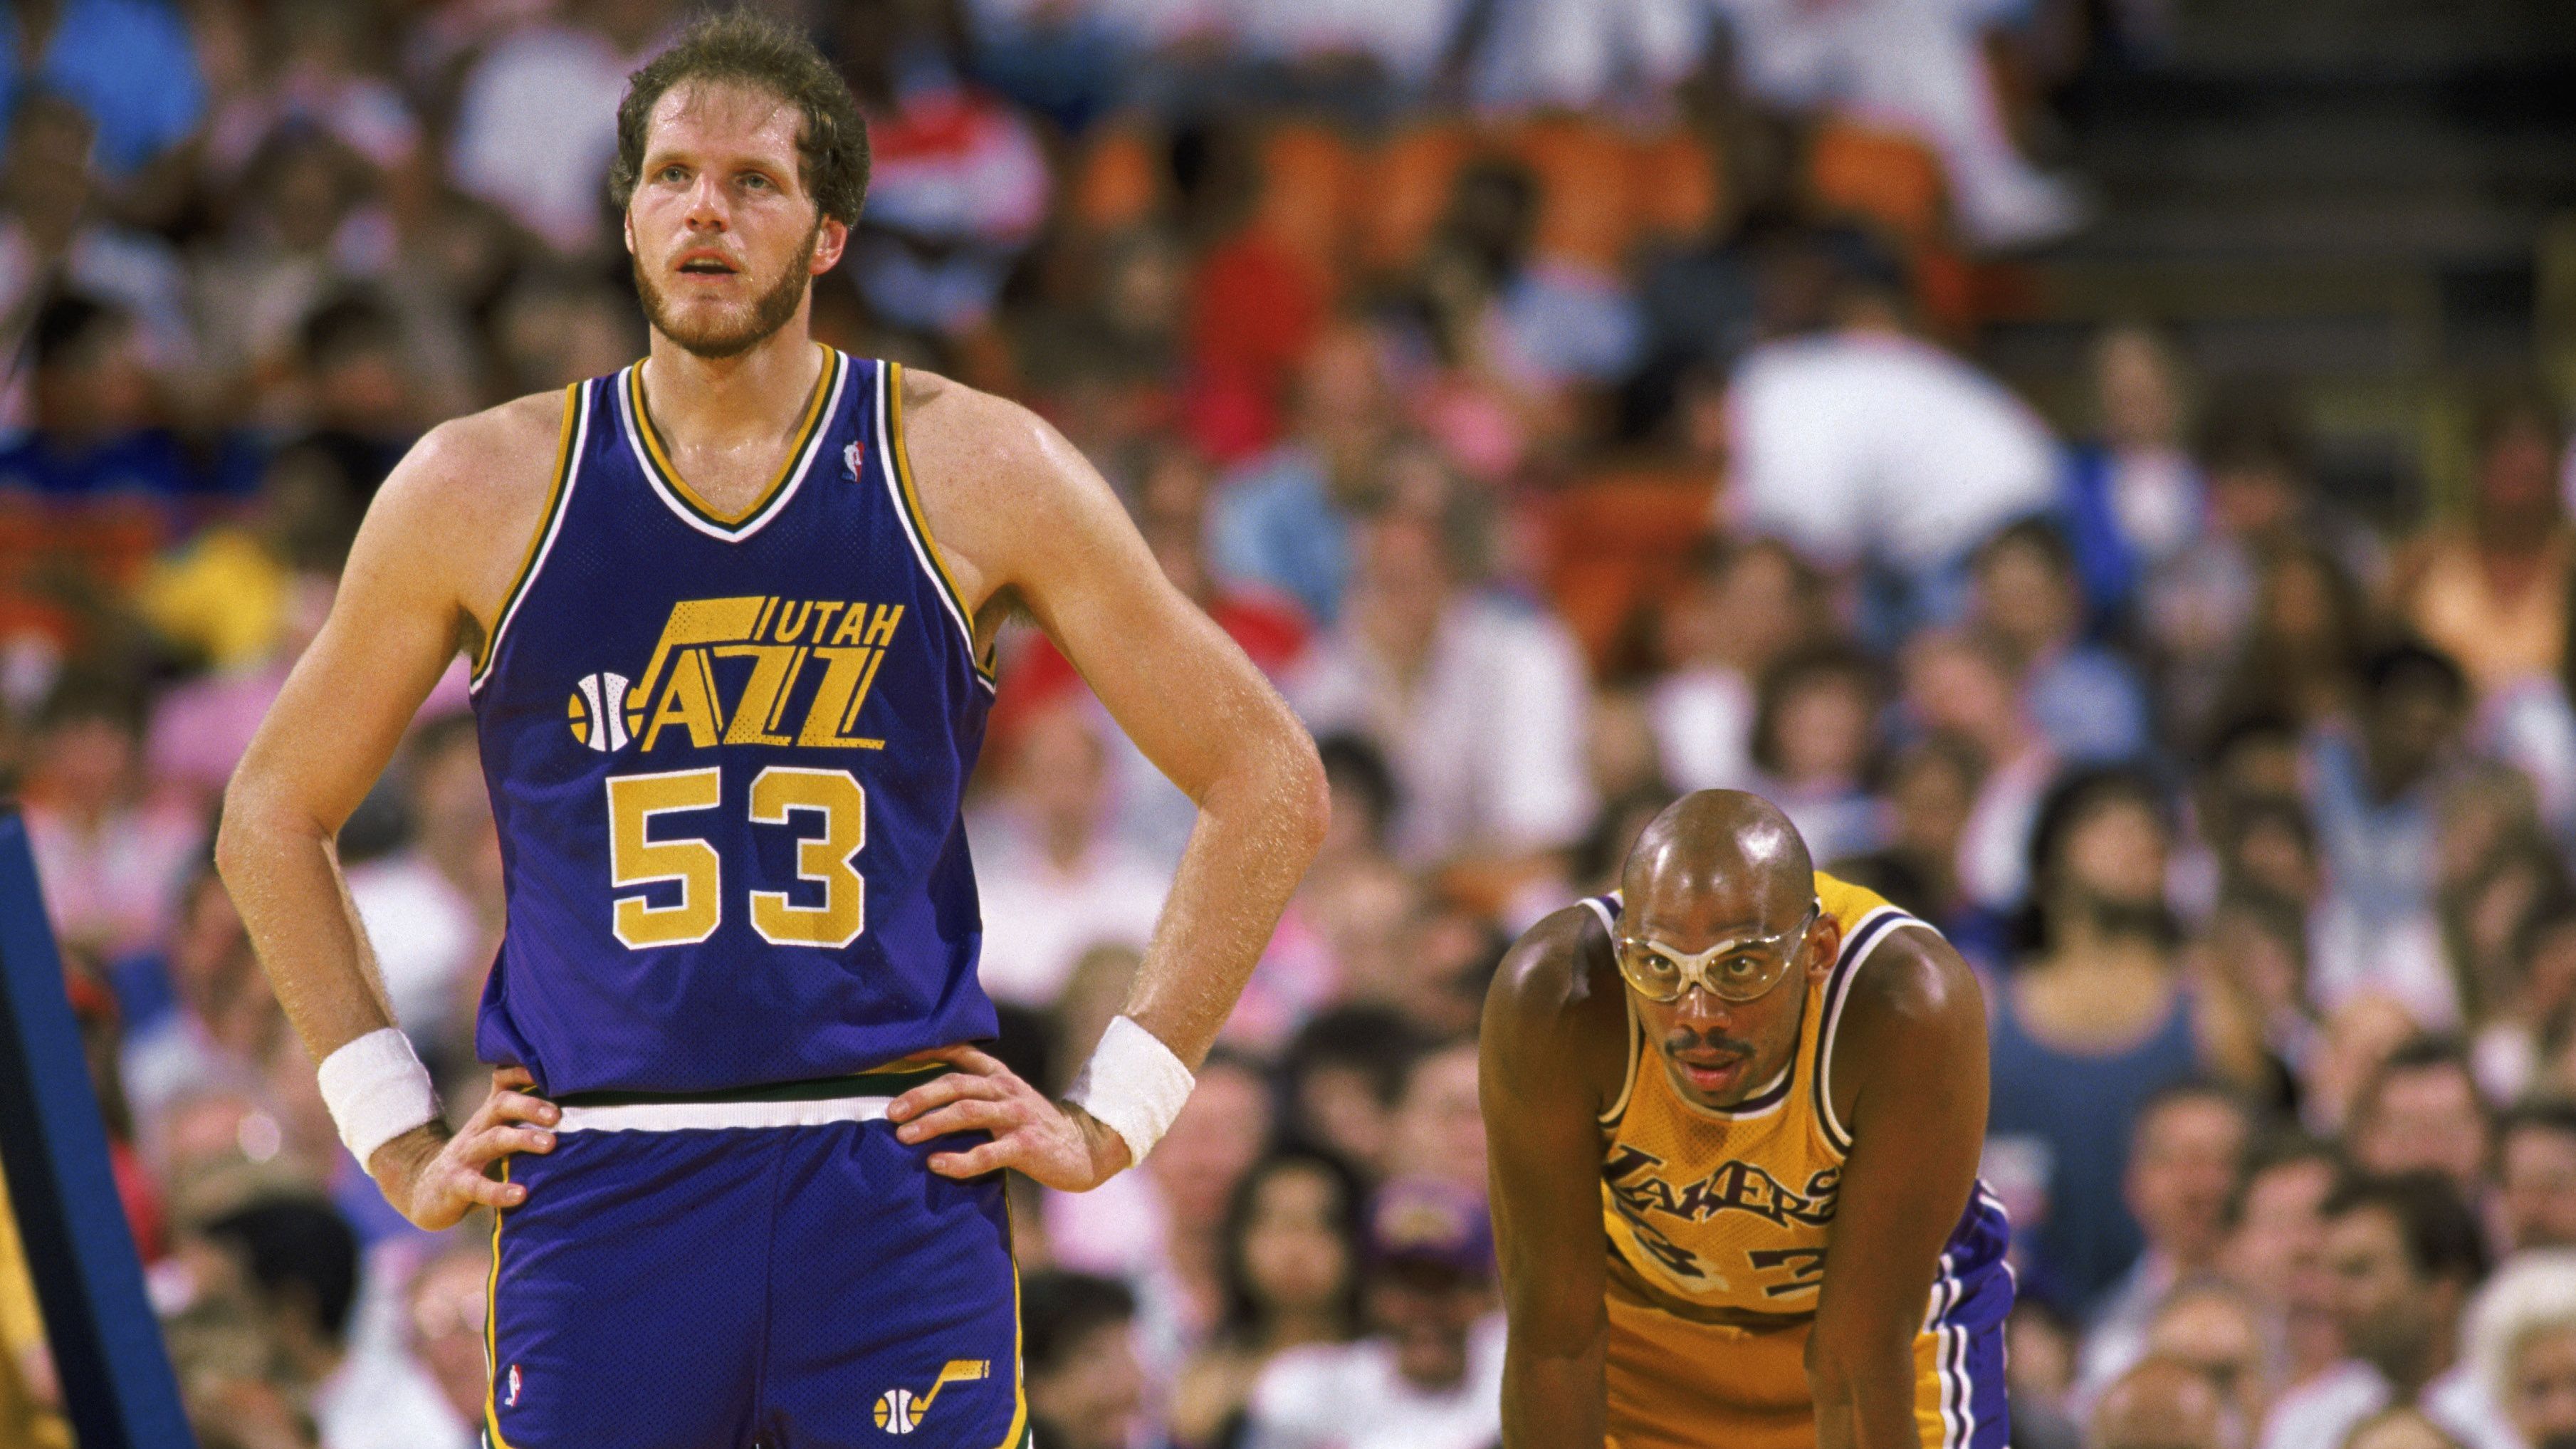 <strong>Mark Eaton - 2,24m</strong><br><strong>Teams:</strong> Utah Jazz<br><strong>Karriere-Stats:</strong> 6,0 Punkte, 7,9 Rebounds, 1,0 Assists, 3,5 Blocks<br><strong>Auszeichnungen:</strong> 2x Defensive Player of the Year, 1x All-Star, 5x All-Defensive-Team